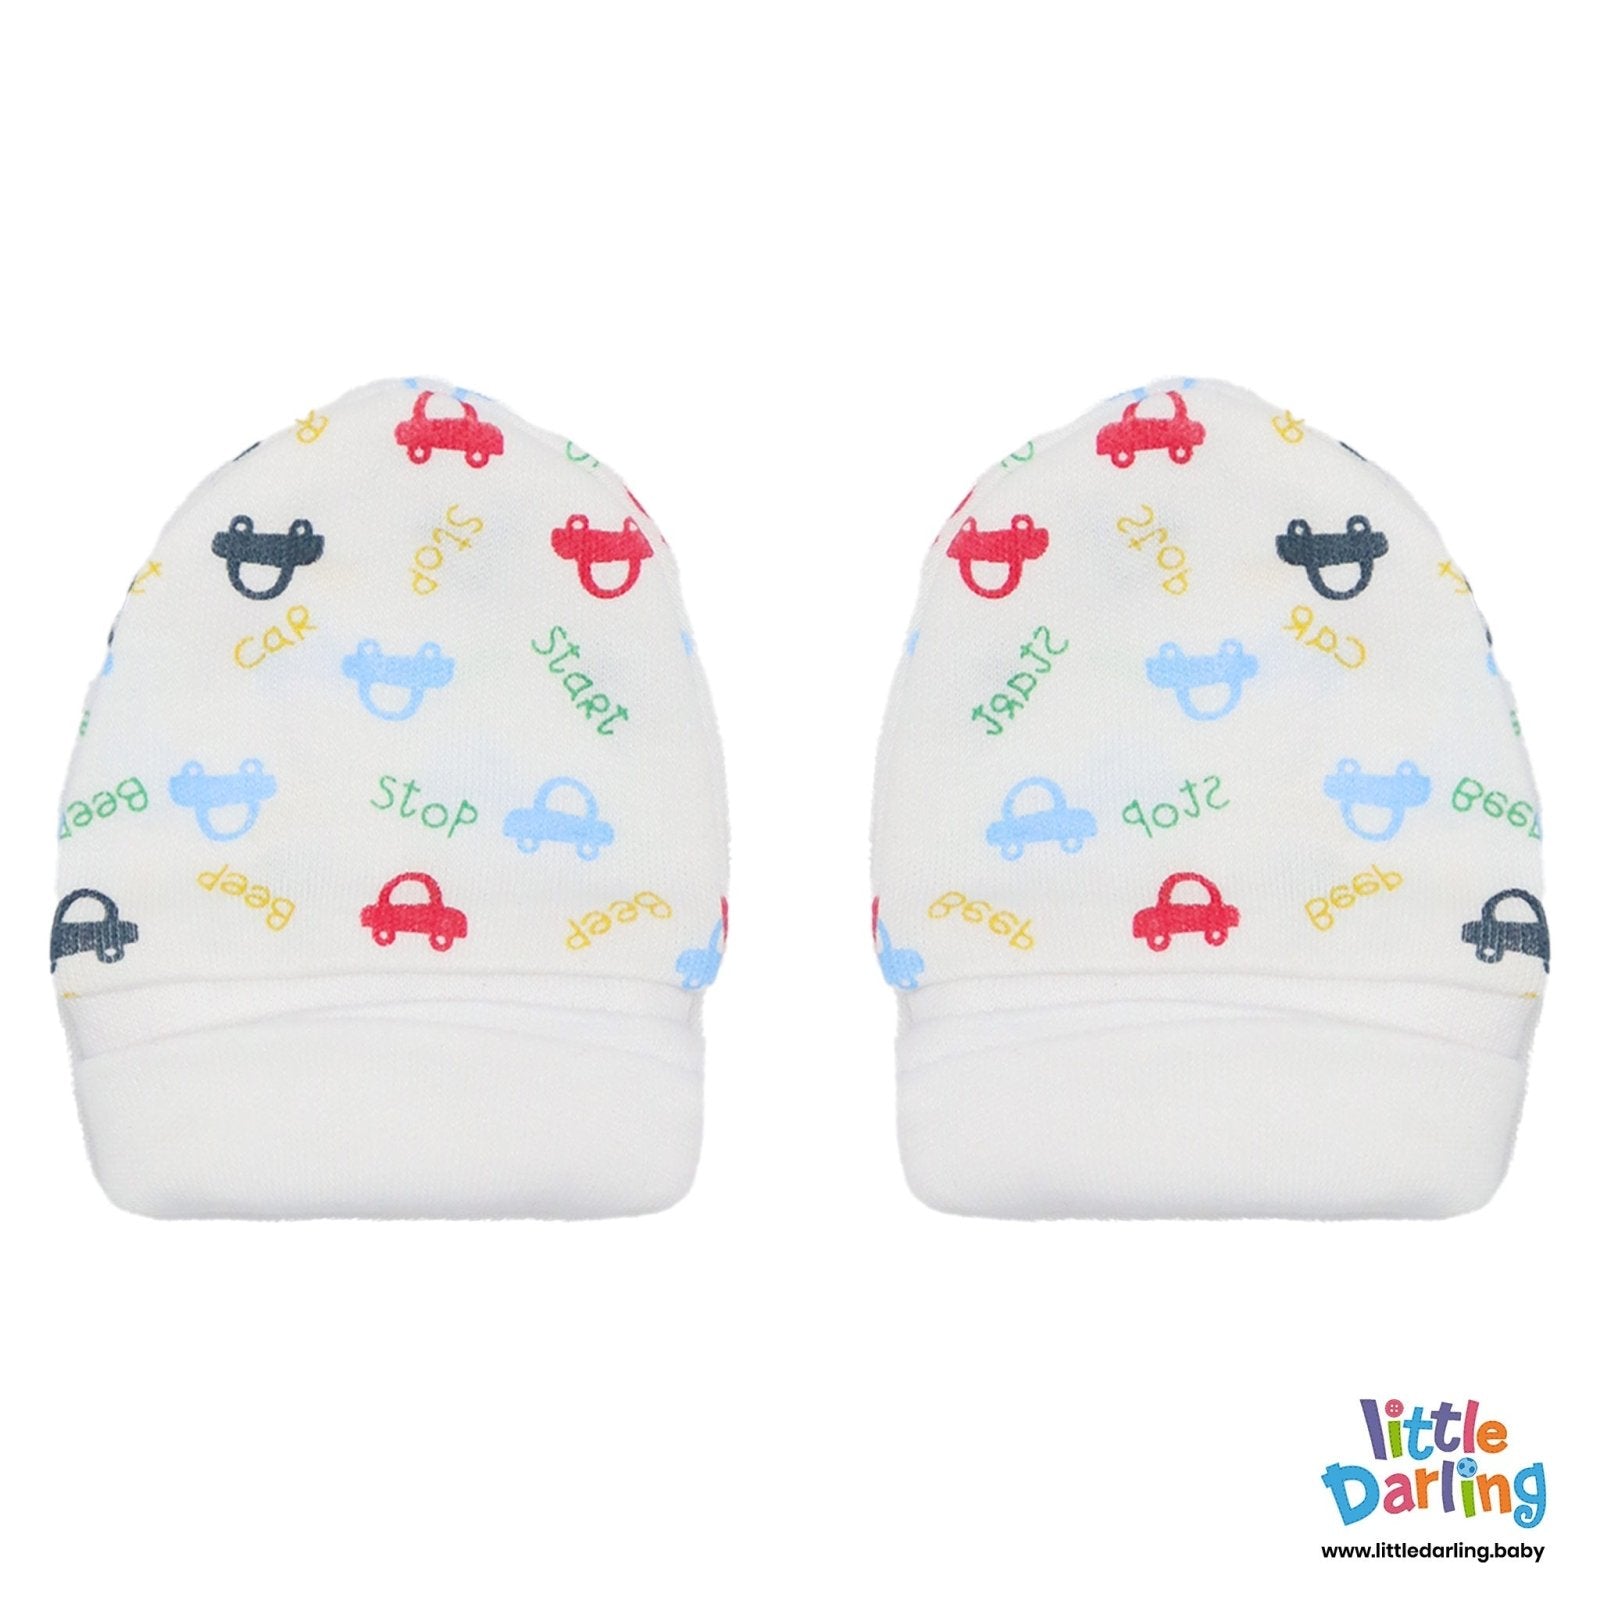 Baby Mittens Pair Pk Of 2 car print by Little Darling